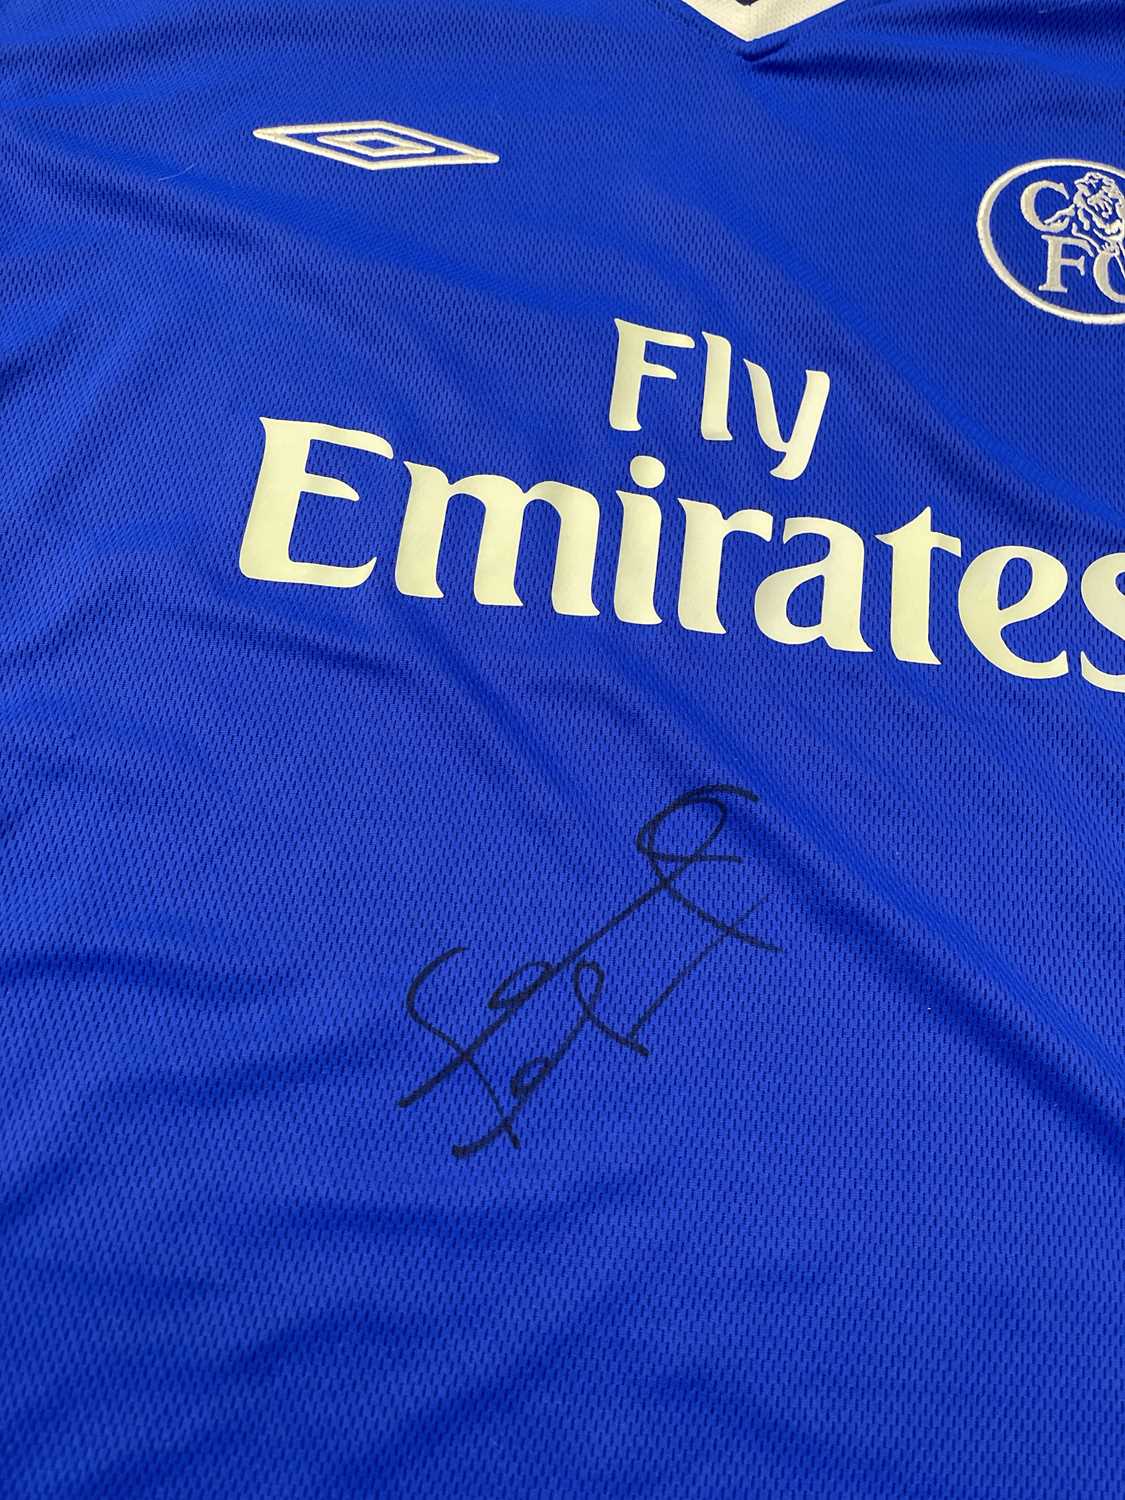 CHELSEA FC - SIGNED SHIRT AND PENNANT. - Image 3 of 4